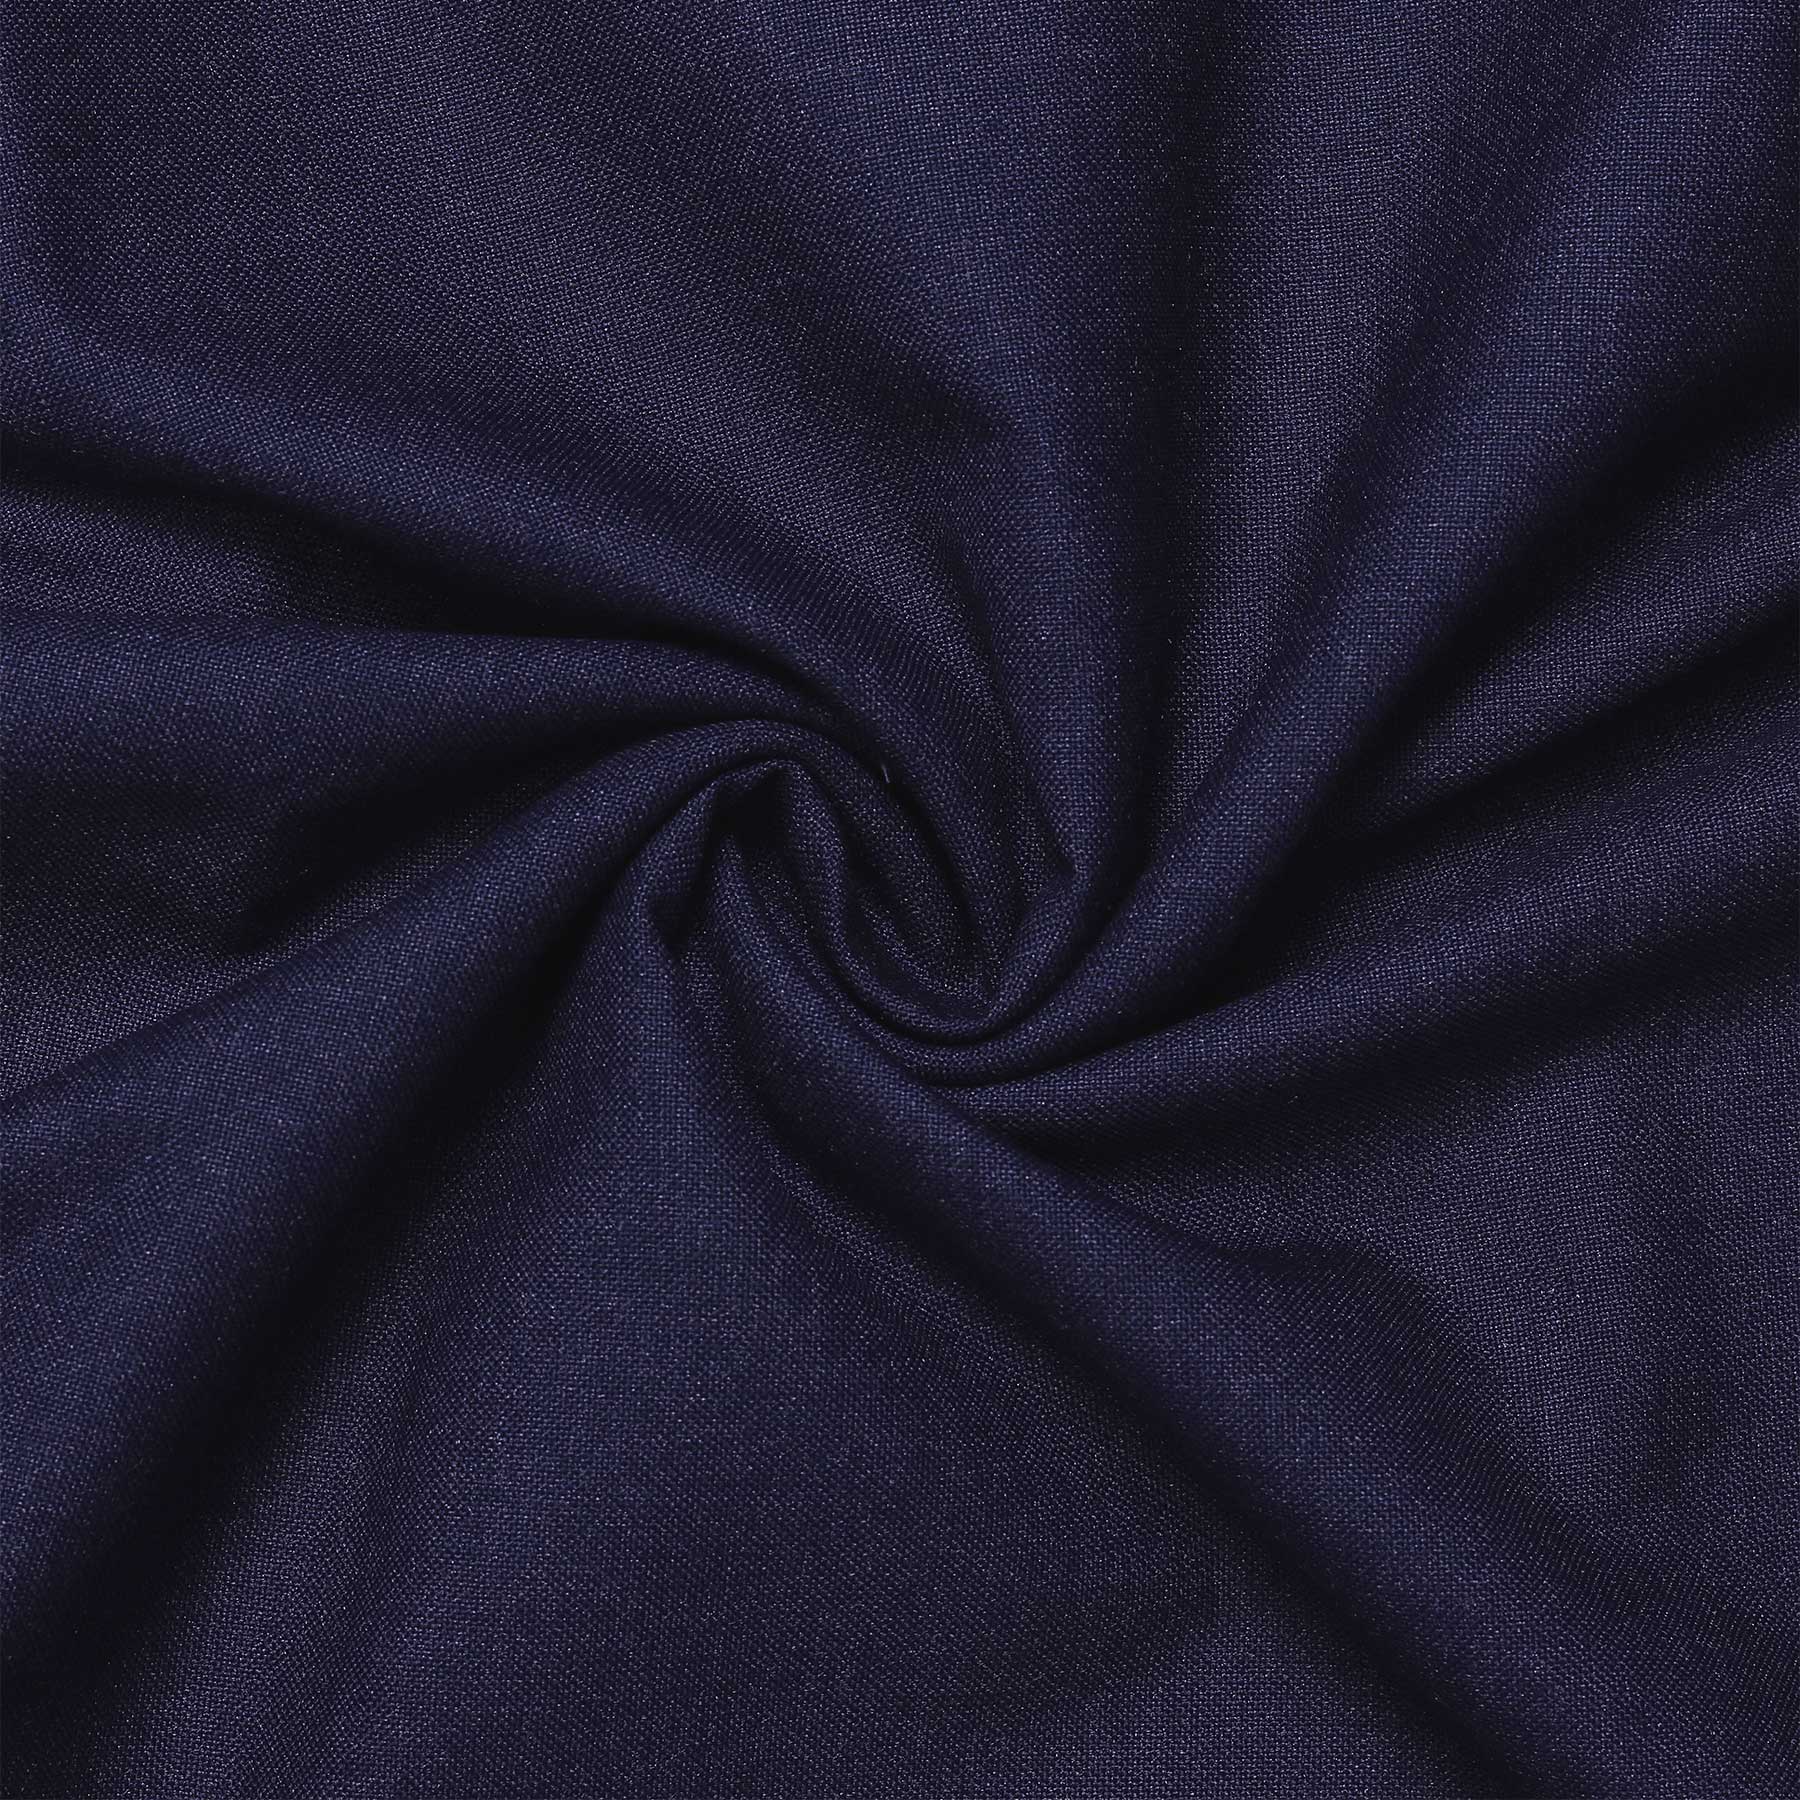 Buy Navy Blue Plain Unstitched Trouser Polycotton Pant Fabric for Best  Price Reviews Free Shipping